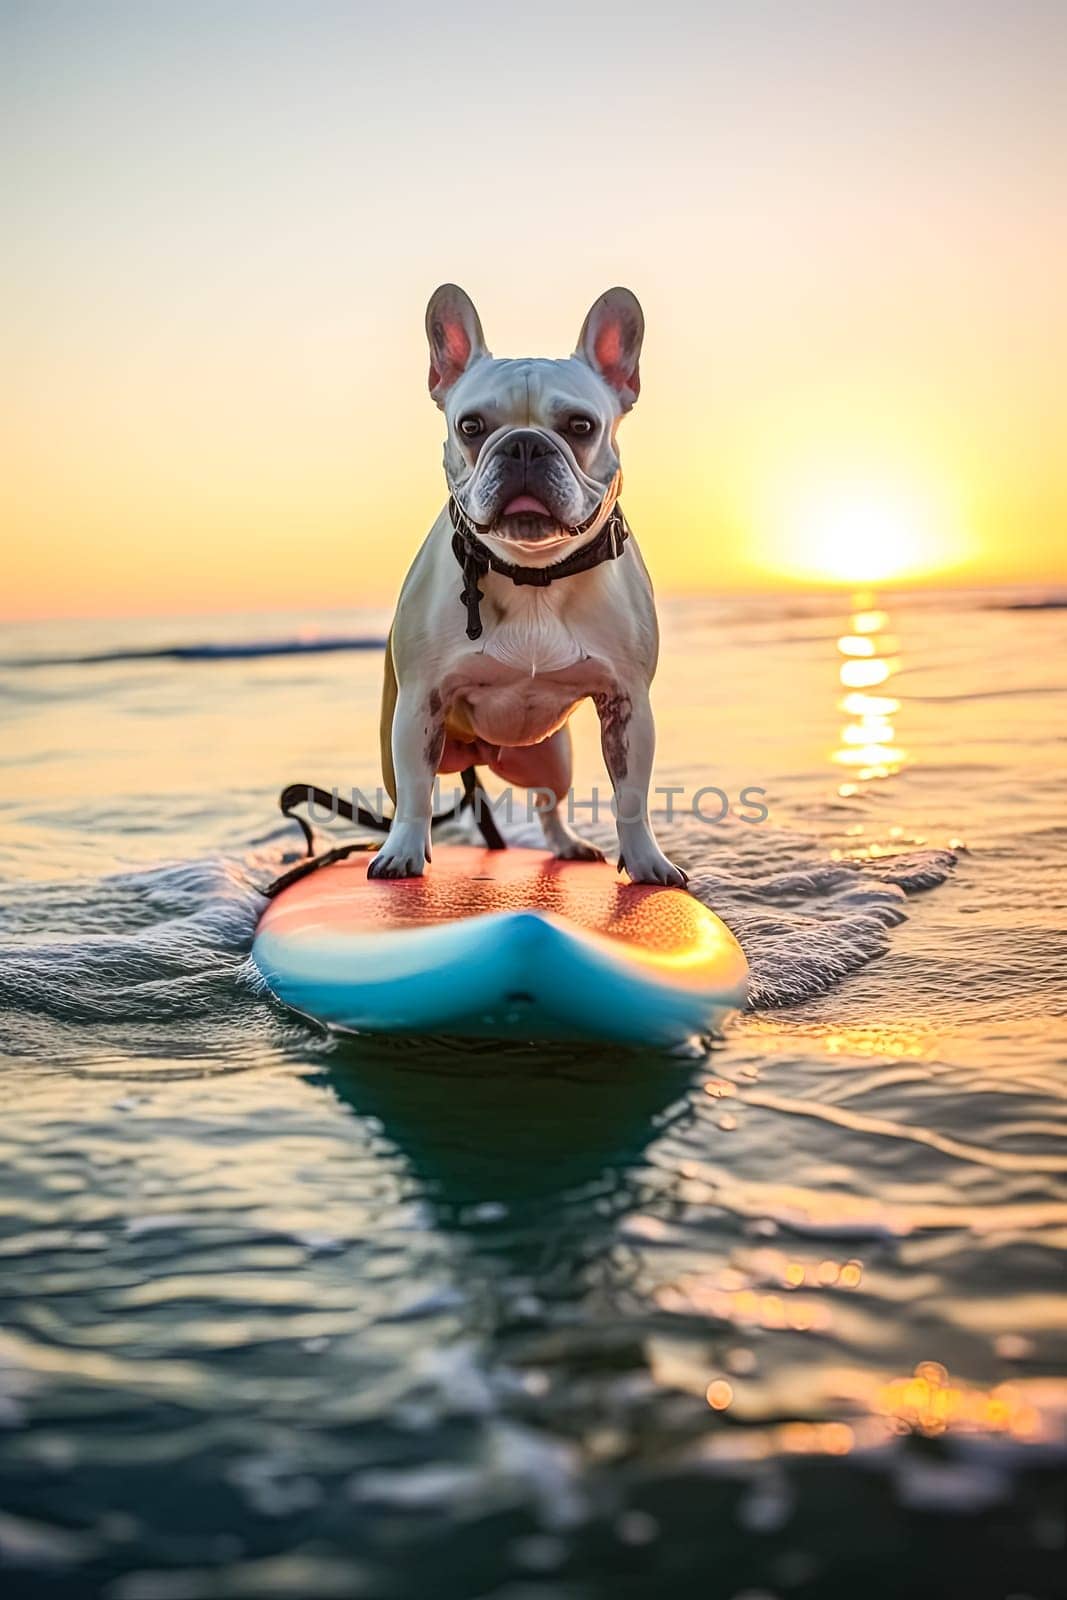 A dog is surfing on a surfboard in the ocean. The dog is wearing a harness and he is enjoying the ride. The image has a playful and fun mood, as it shows a dog engaging in a human activity